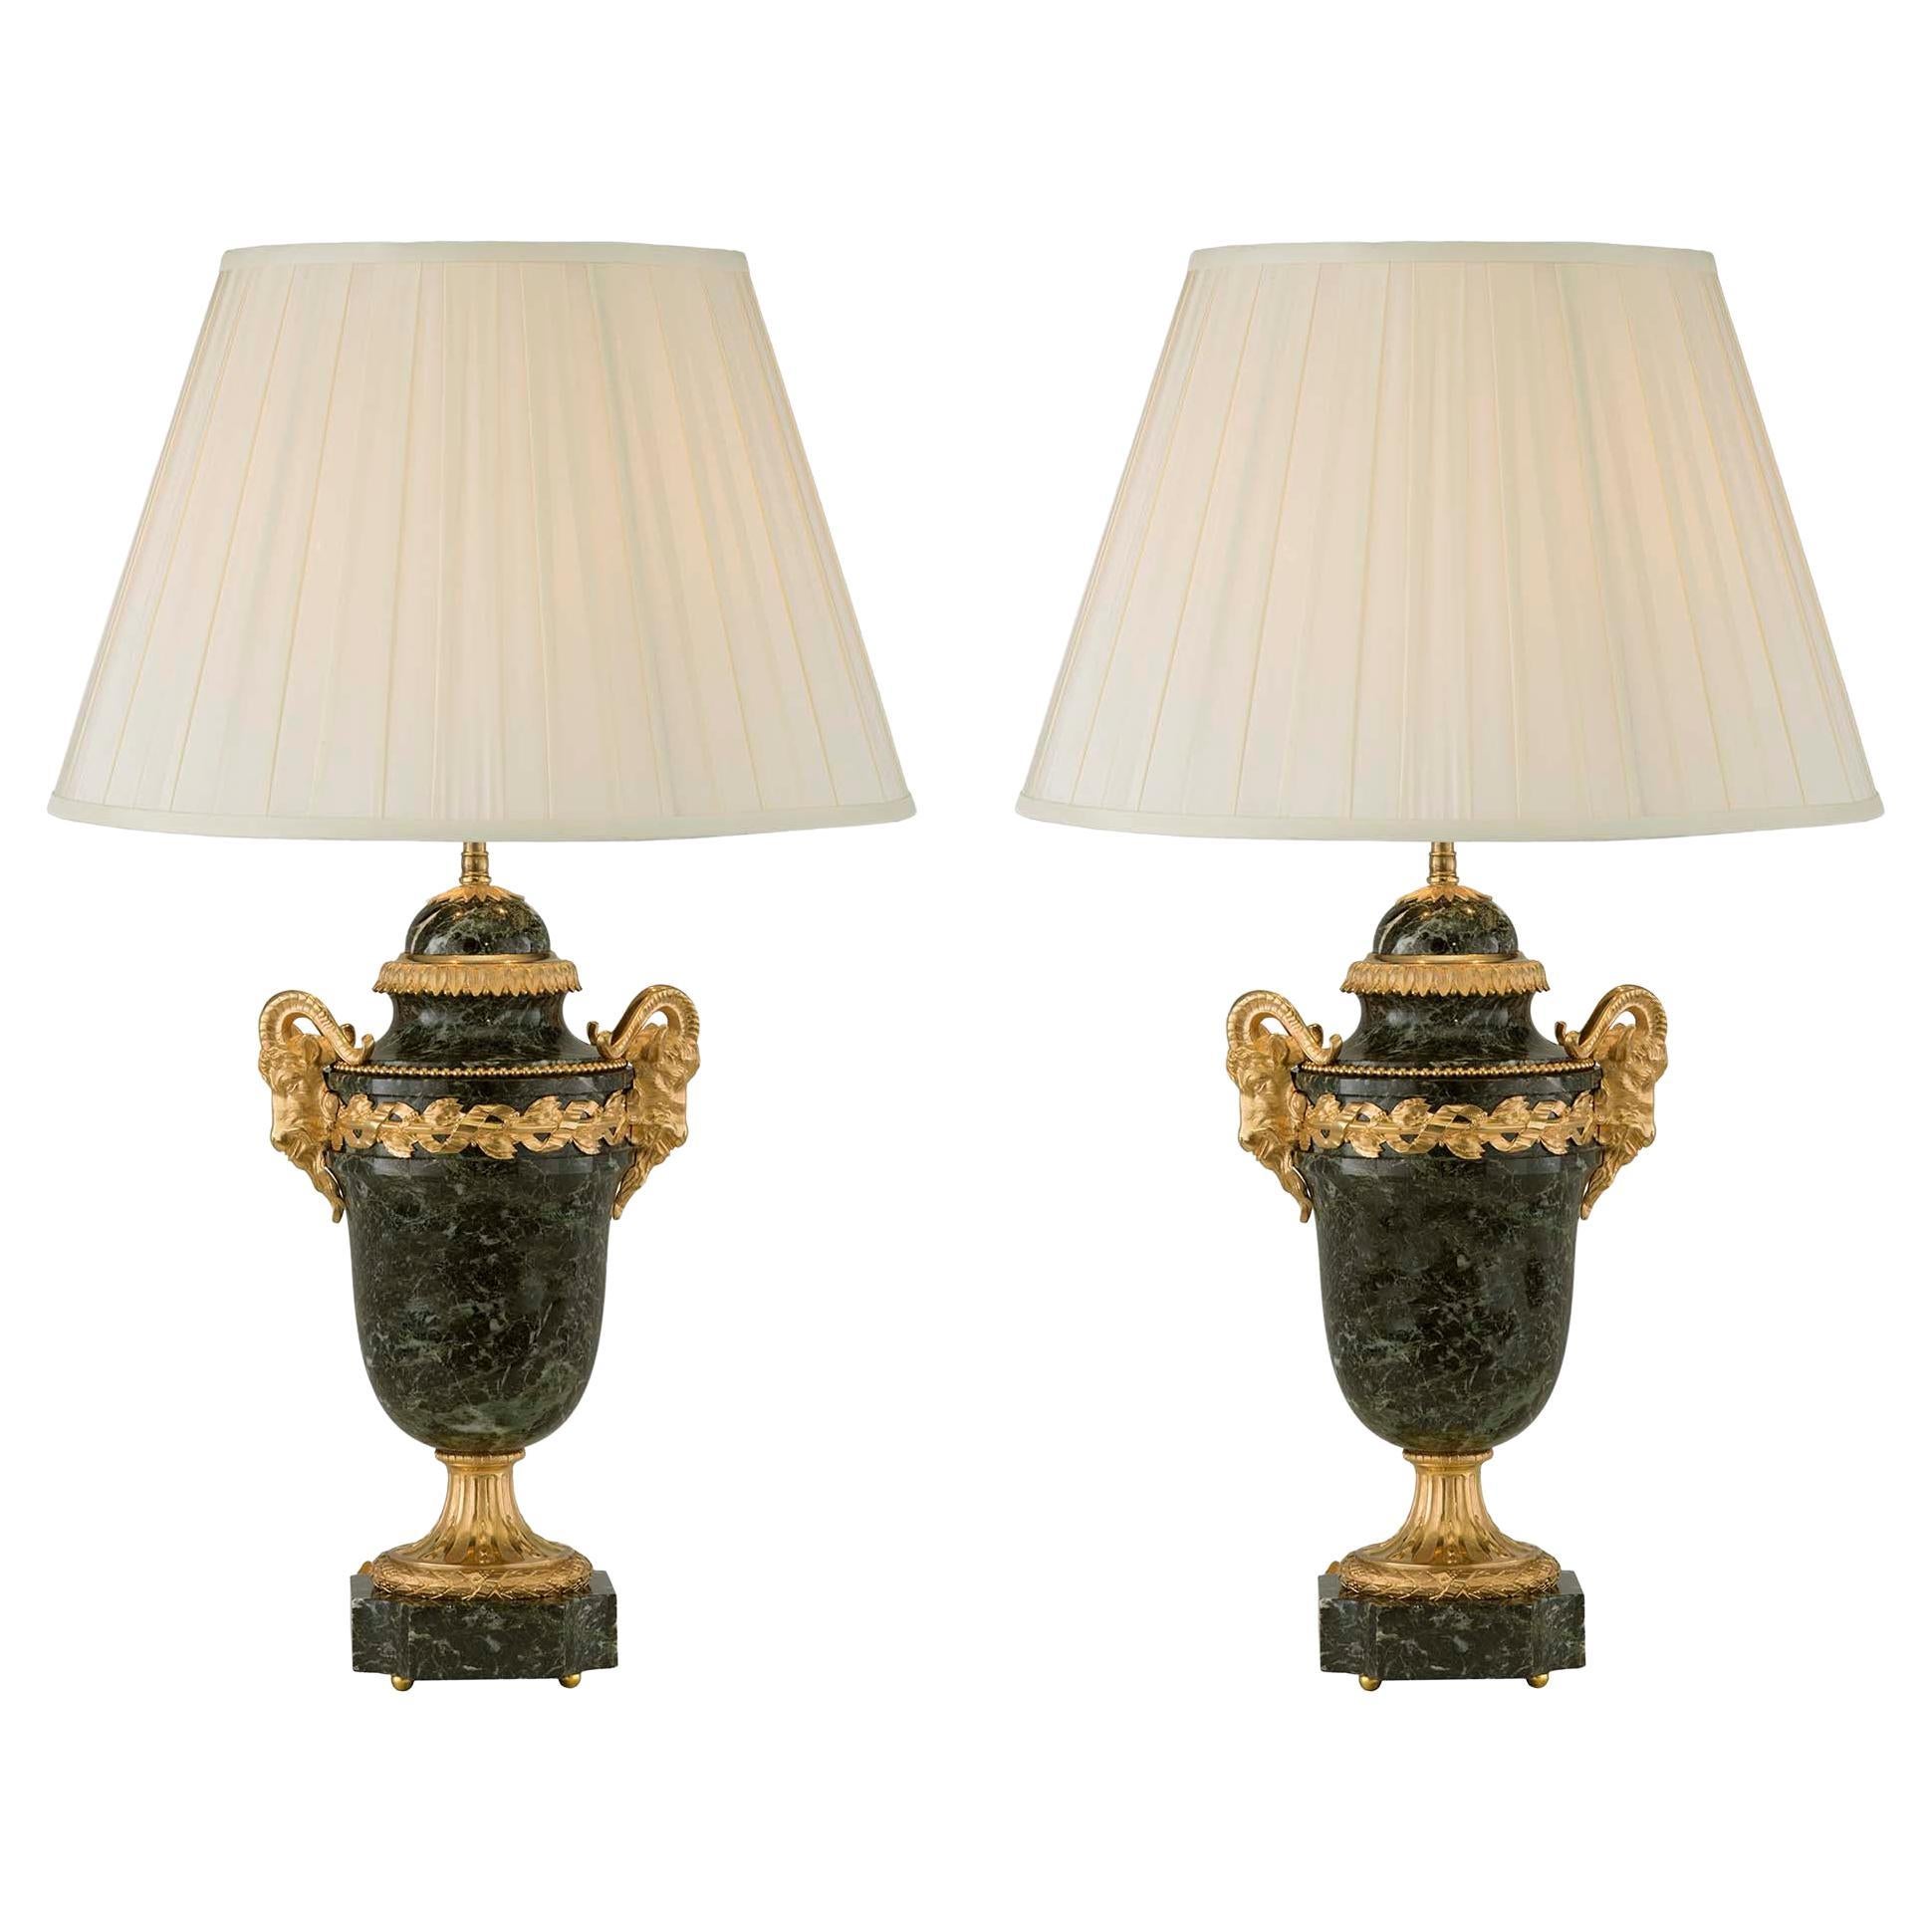 Pair of French 19th Century Louis XVI St. Ormolu and Vert Antique Marble Lamps For Sale